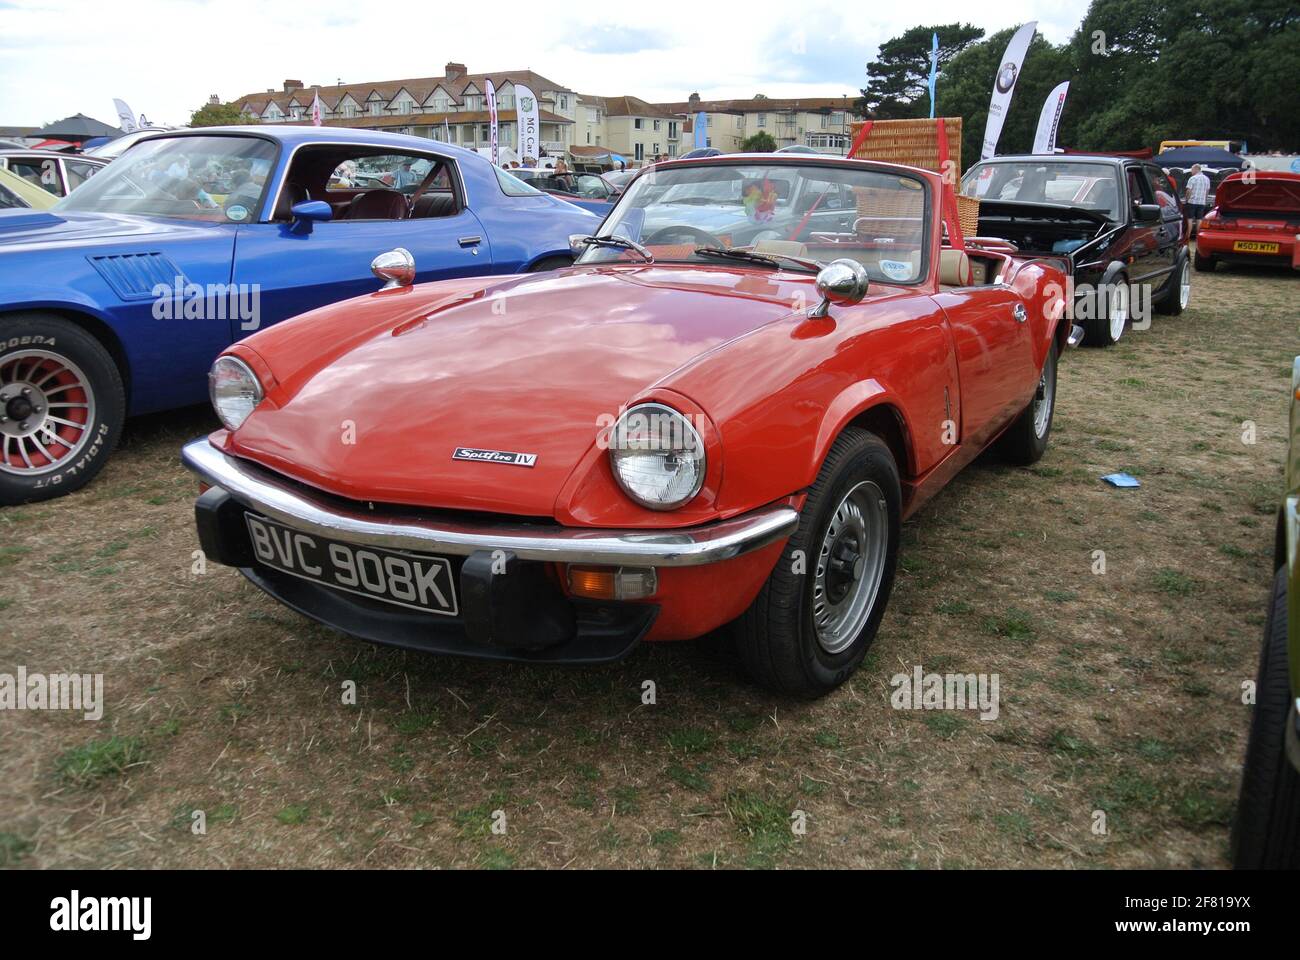 A 1971 Triumph Spitfire parked up on display at the English Riviera classic car show, Paignton, Devon, England, UK. Stock Photo